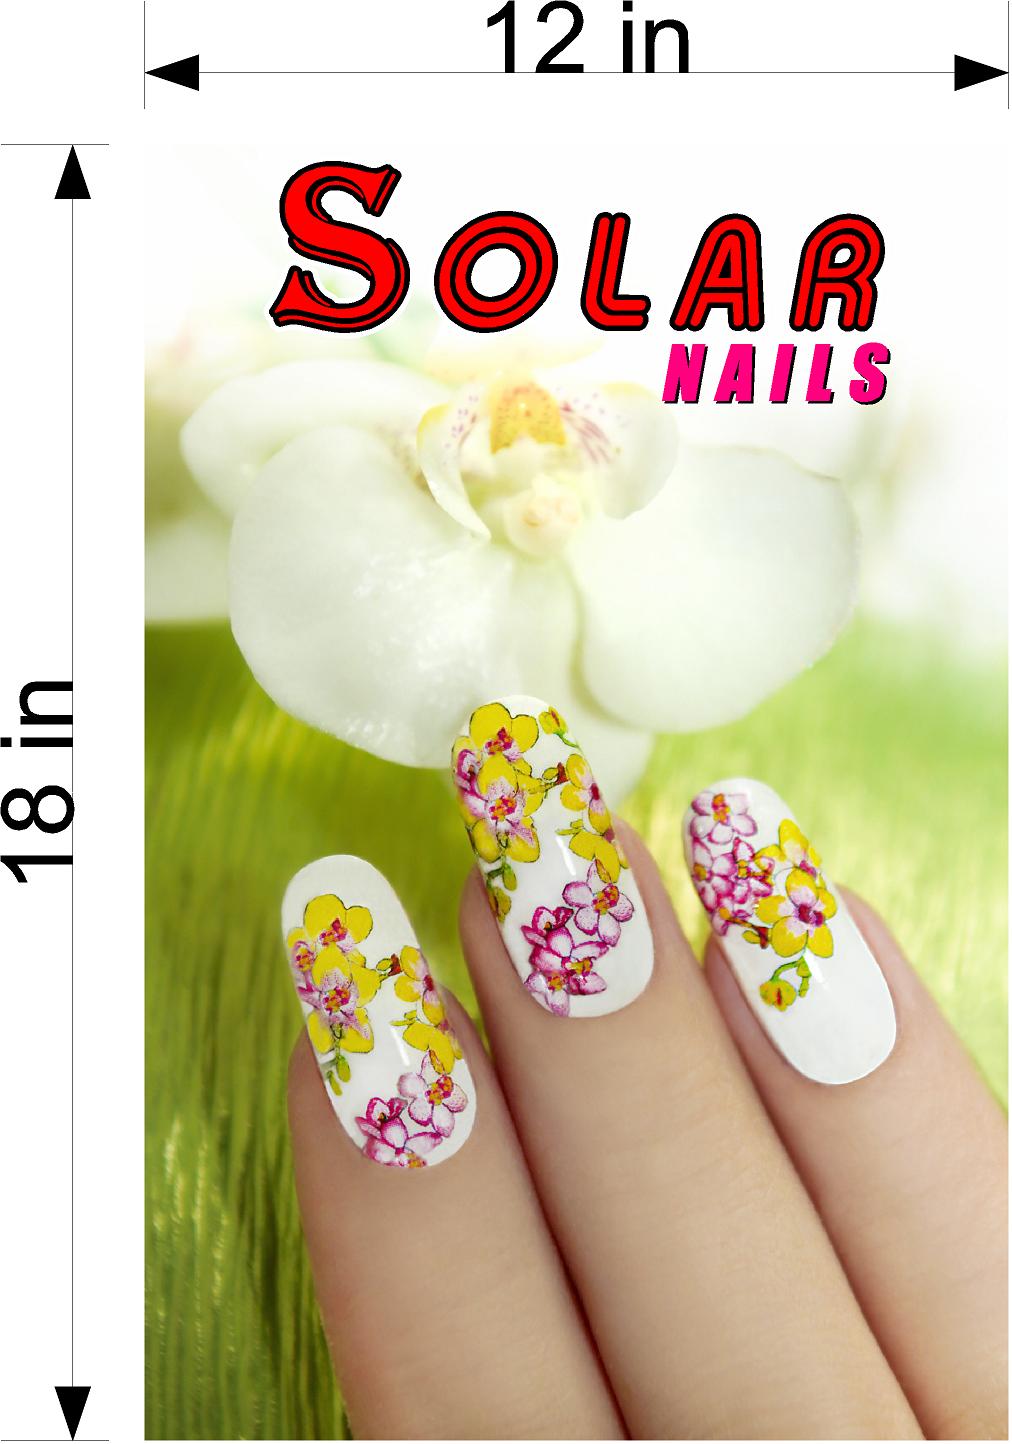 Solar 01 Wallpaper Fabric Poster Decal with Adhesive Backing Wall Sticker Decor Nail Salon Sign Vertical